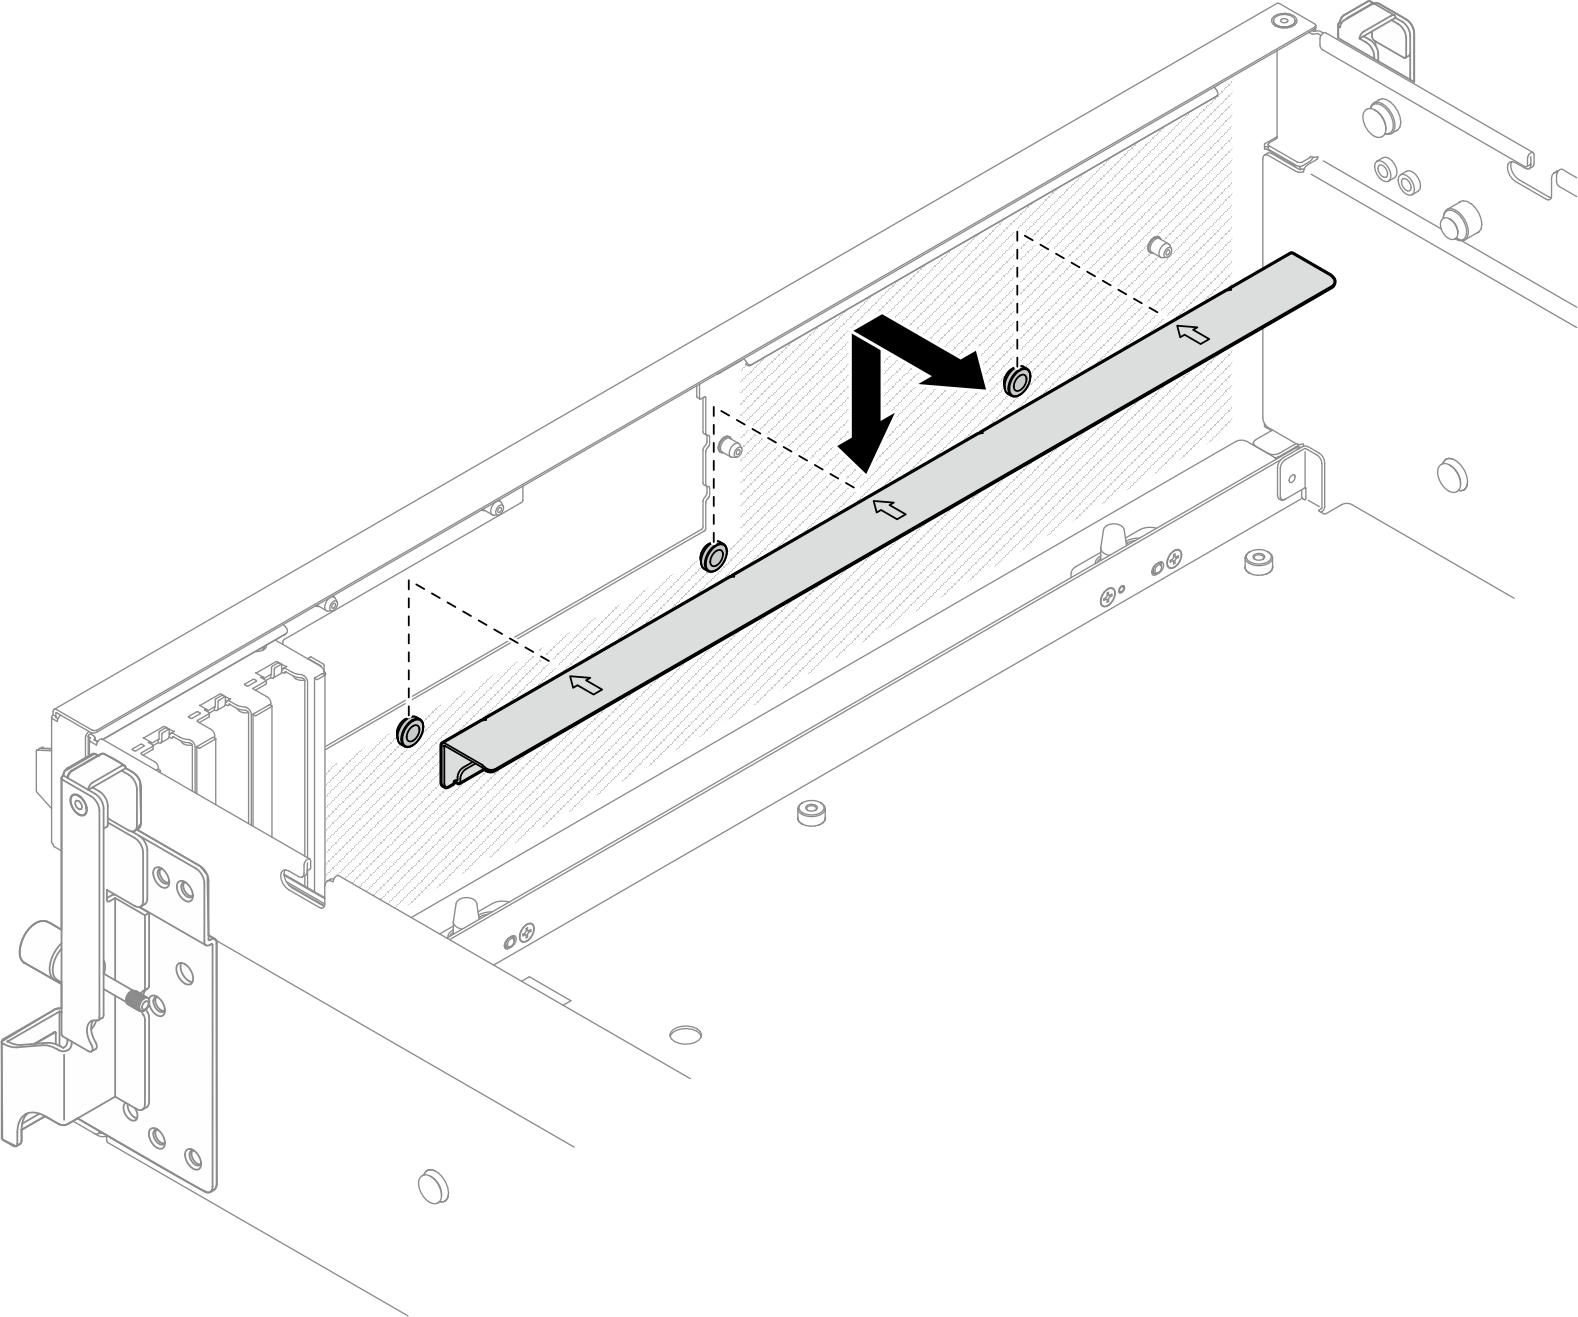 Front drive tray support bracket removal